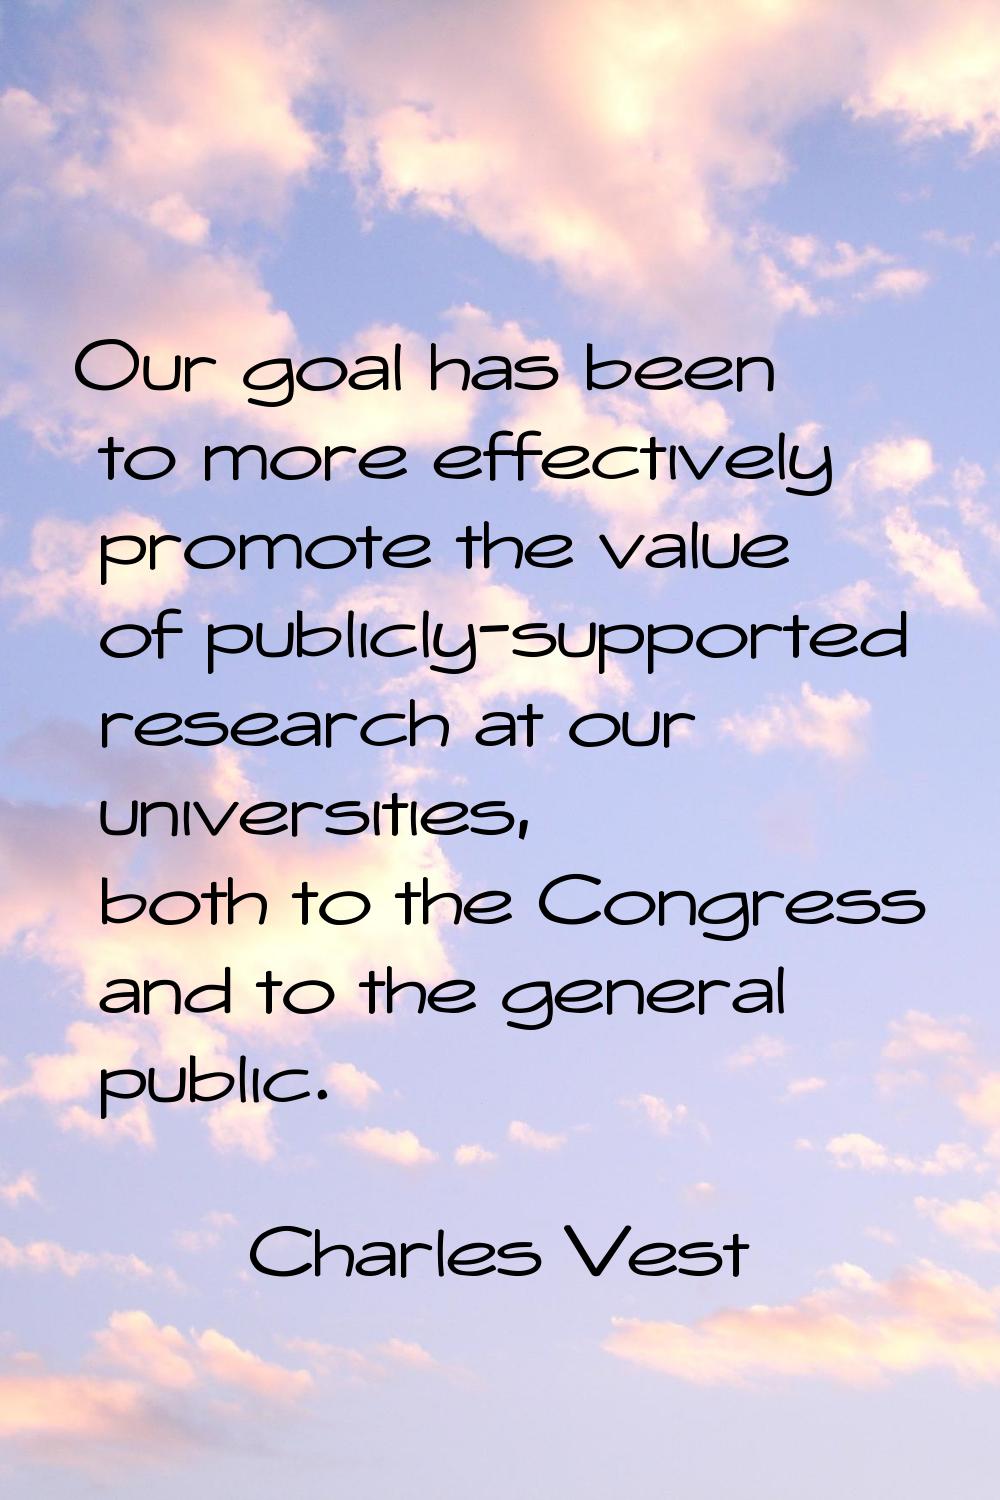 Our goal has been to more effectively promote the value of publicly-supported research at our unive